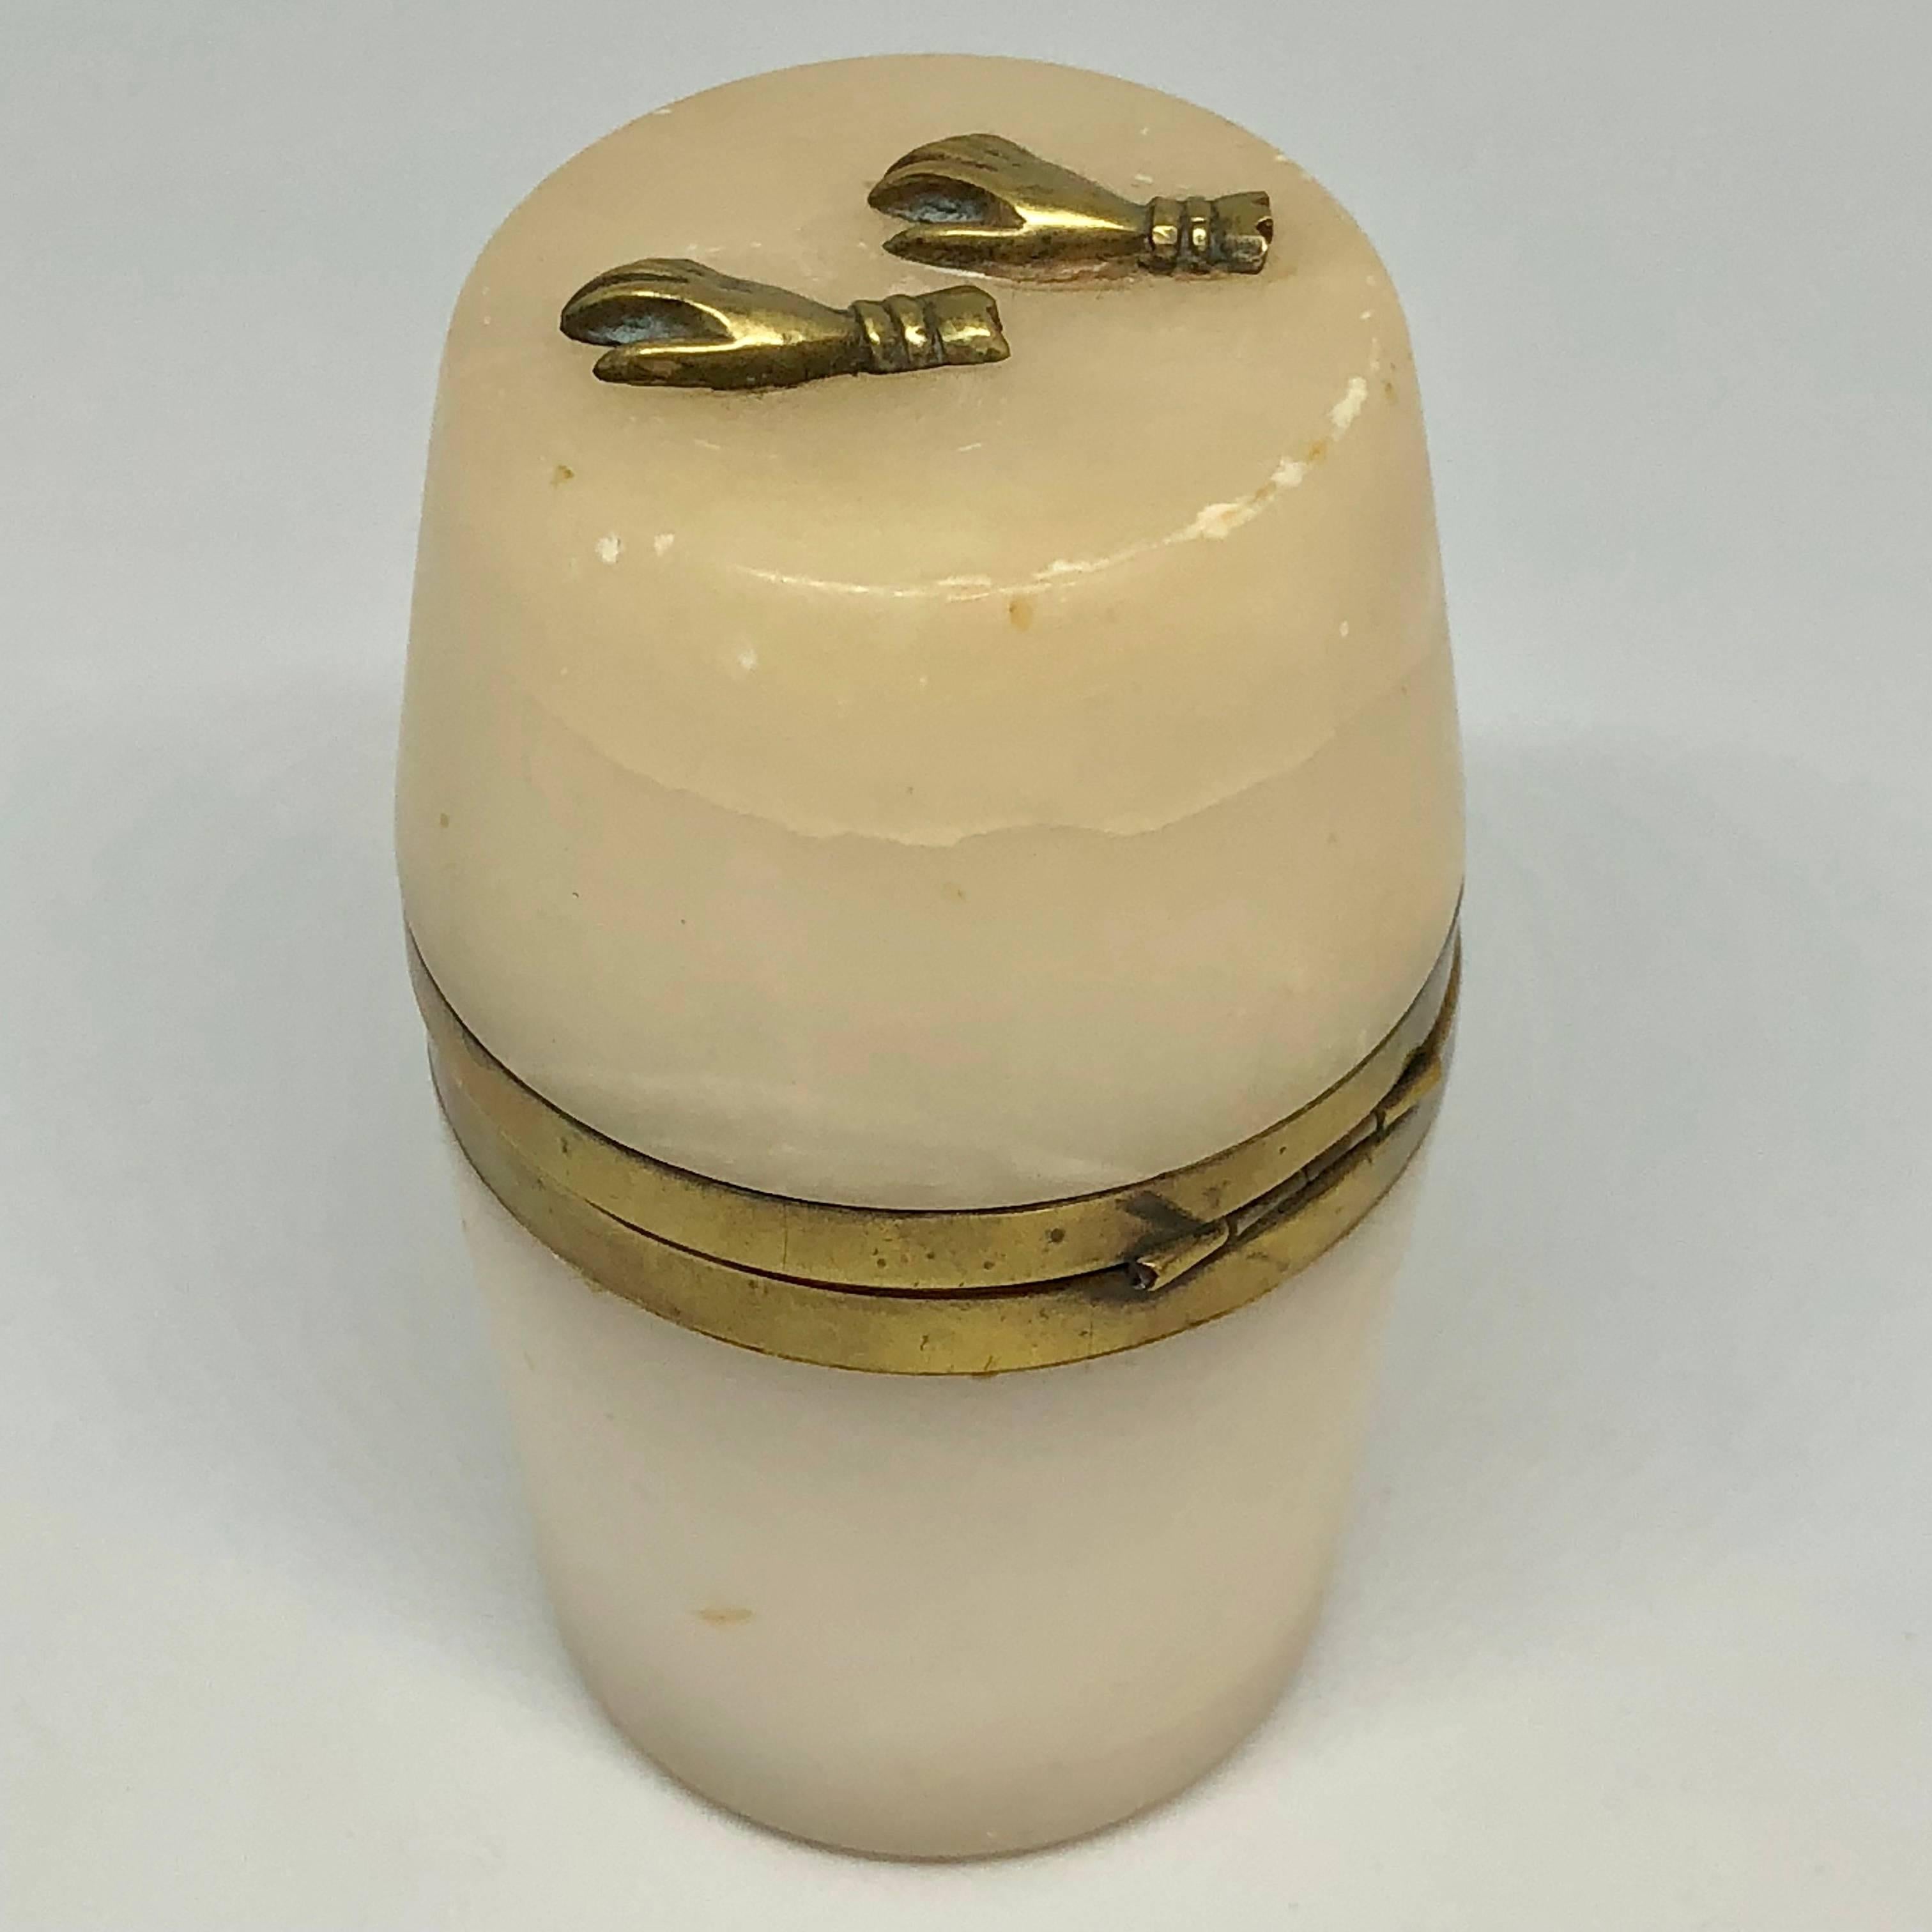 European Small 18th Century Alabaster Barrel Shaped Jewelry Box W/ Brass Hands Decor For Sale